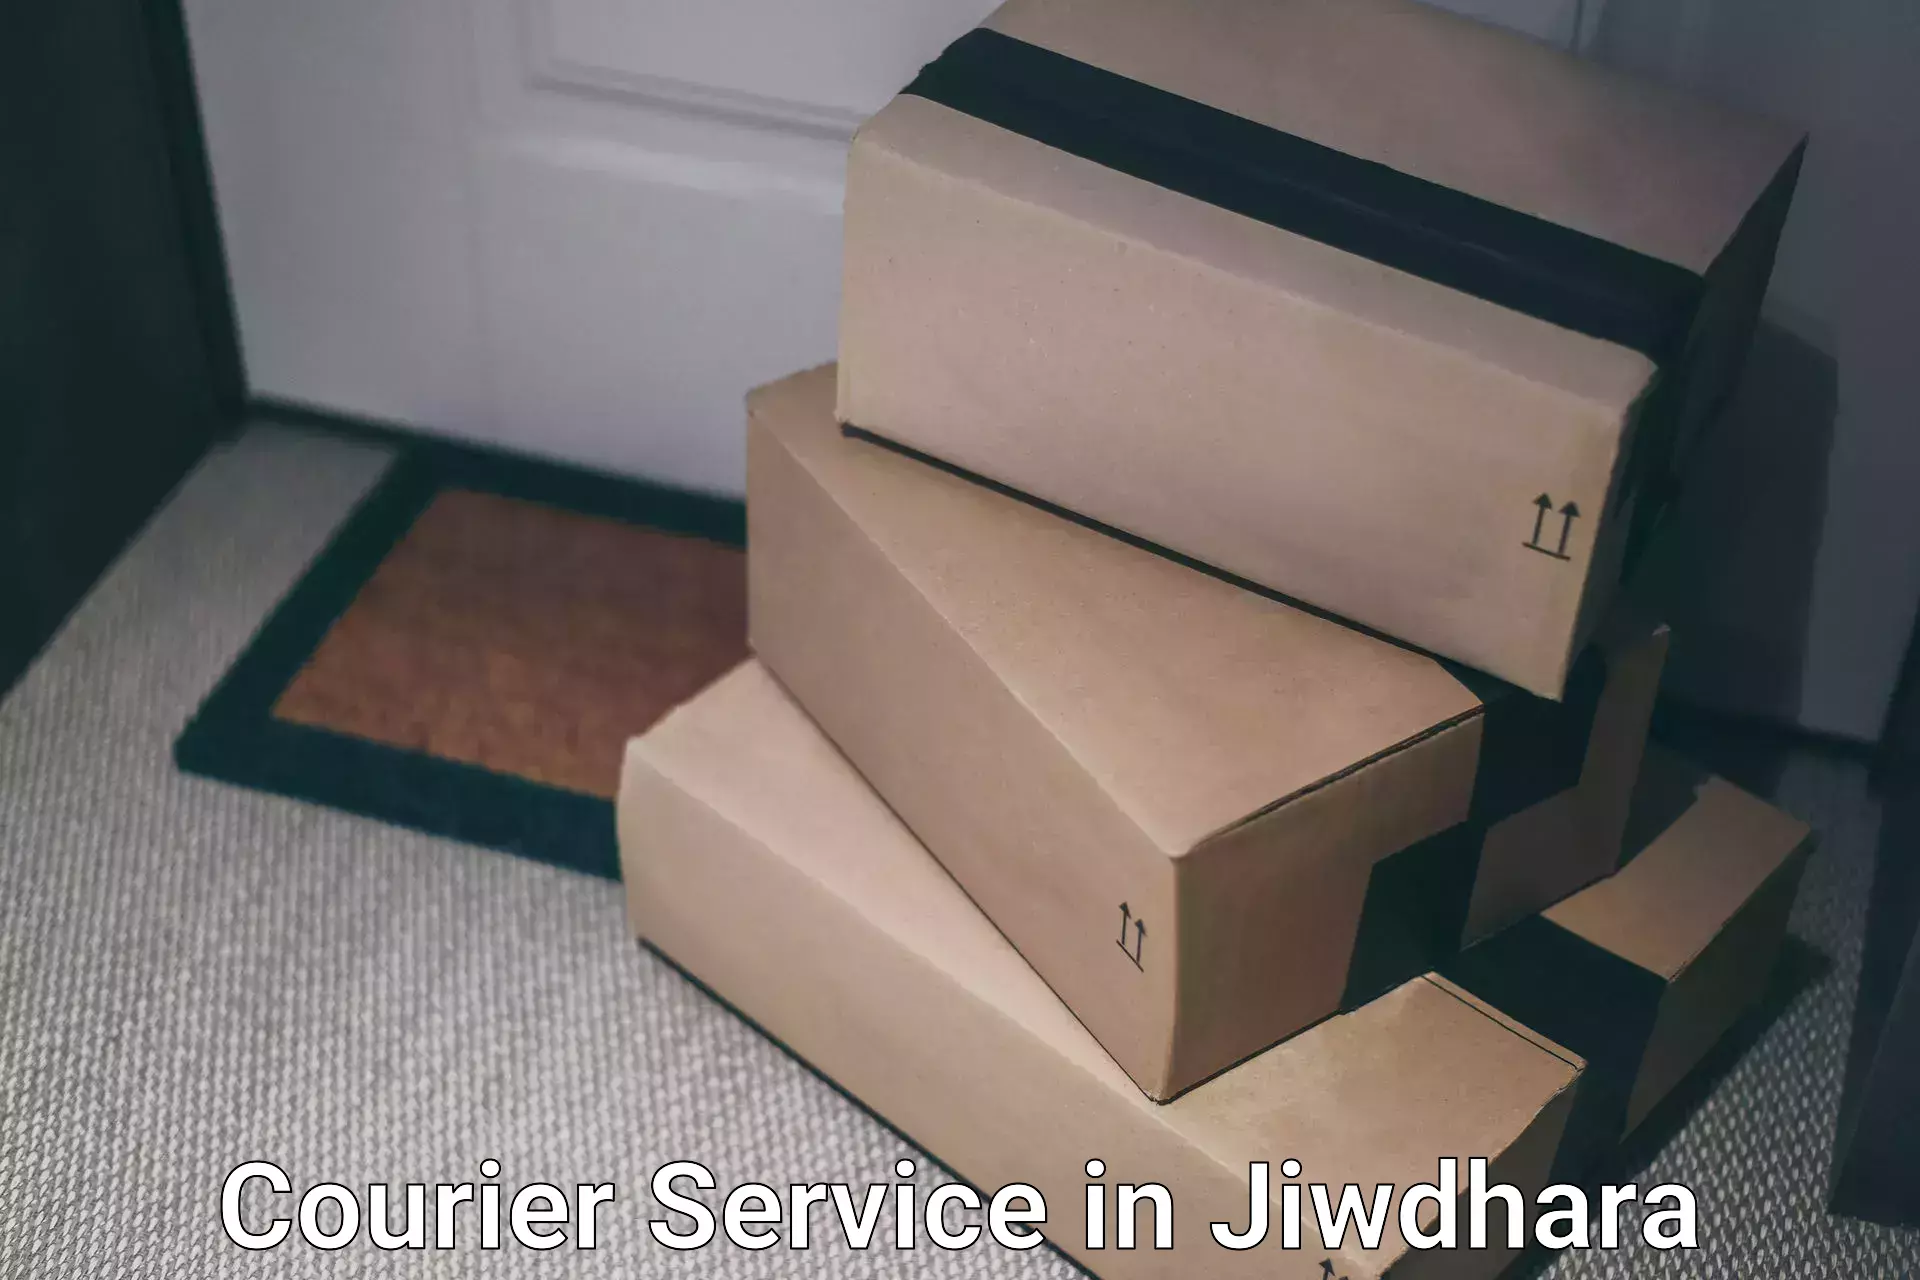 Nationwide delivery network in Jiwdhara